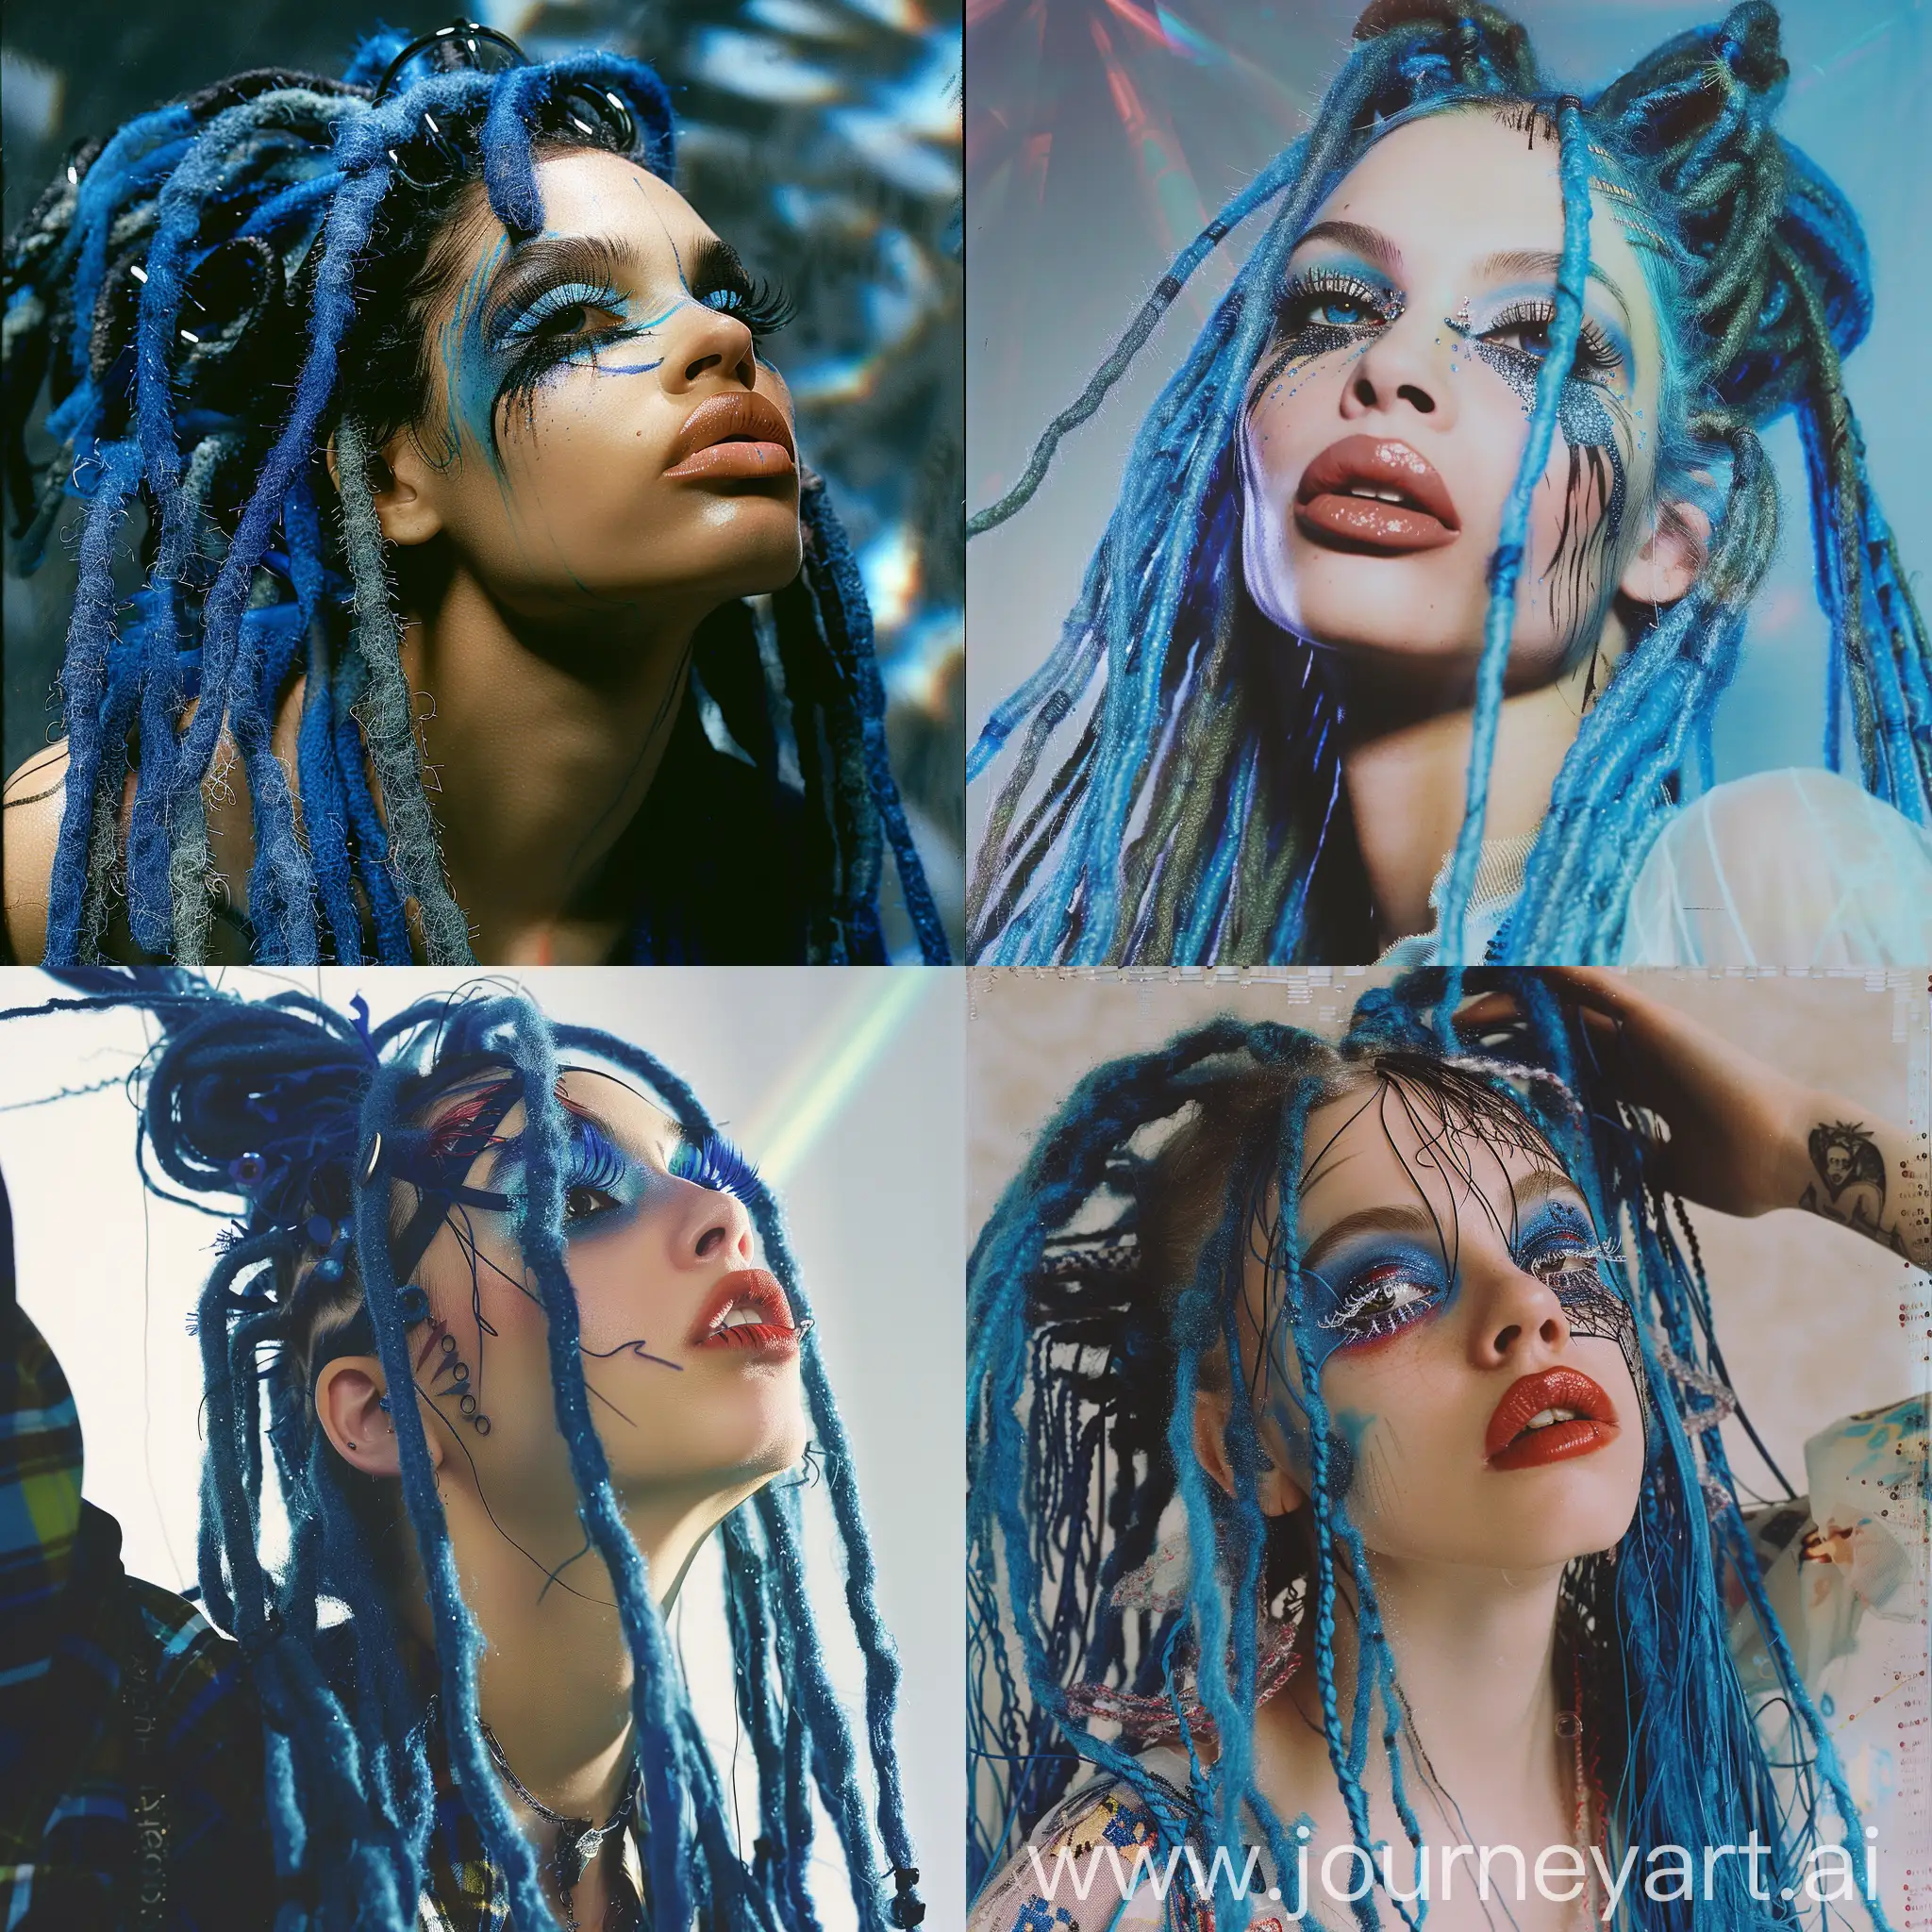 Surreal-Balenciaga-Model-with-Blue-Dreadlocks-and-Braids-in-Dynamic-Pose